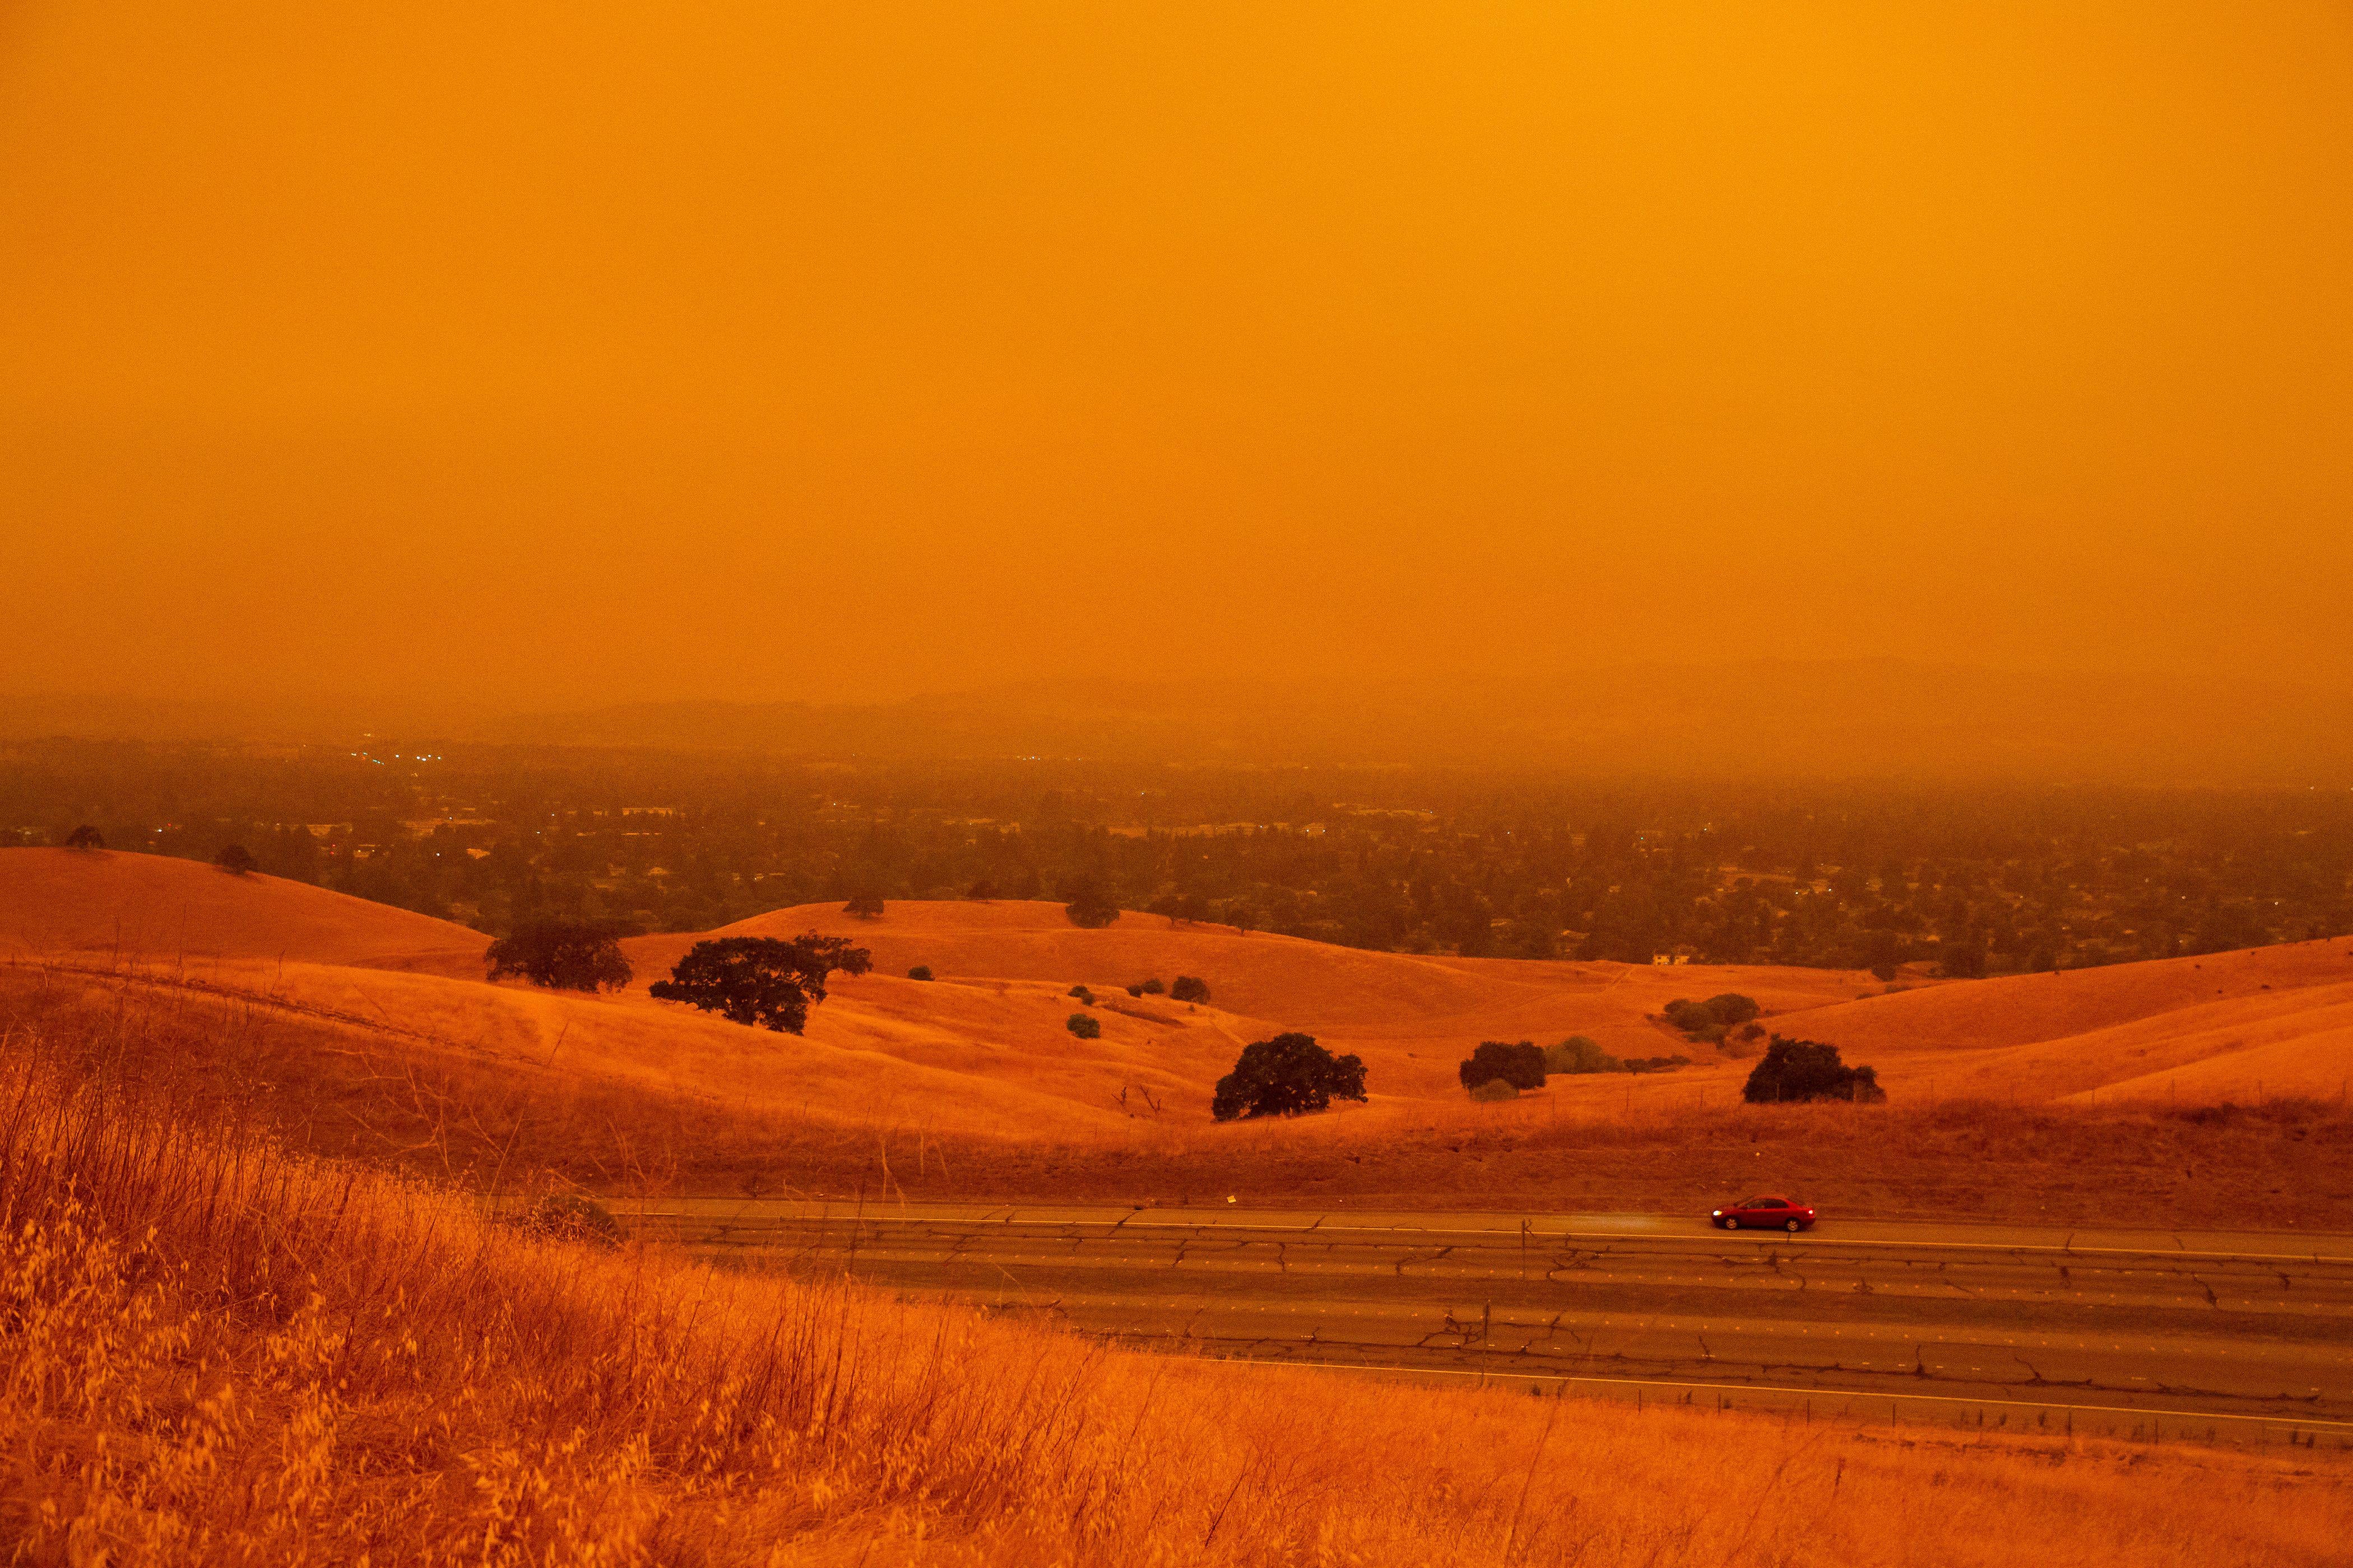 A car drives by in a landscape turned orange-red by wildfire smoke.